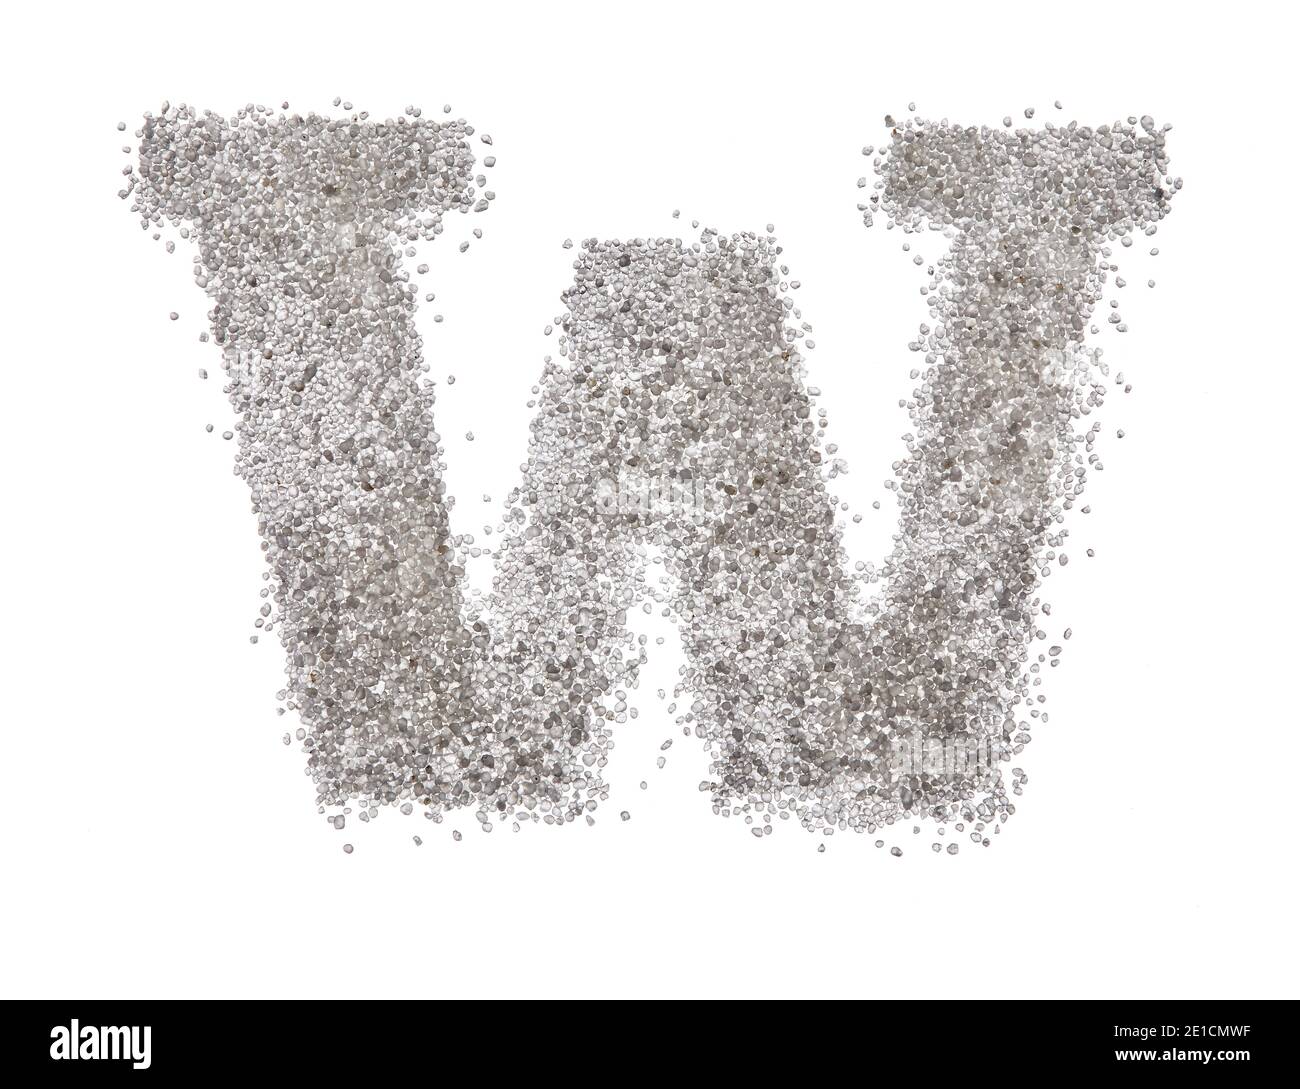 Serif sand letter capital W with hard edges photographed on a white background Stock Photo